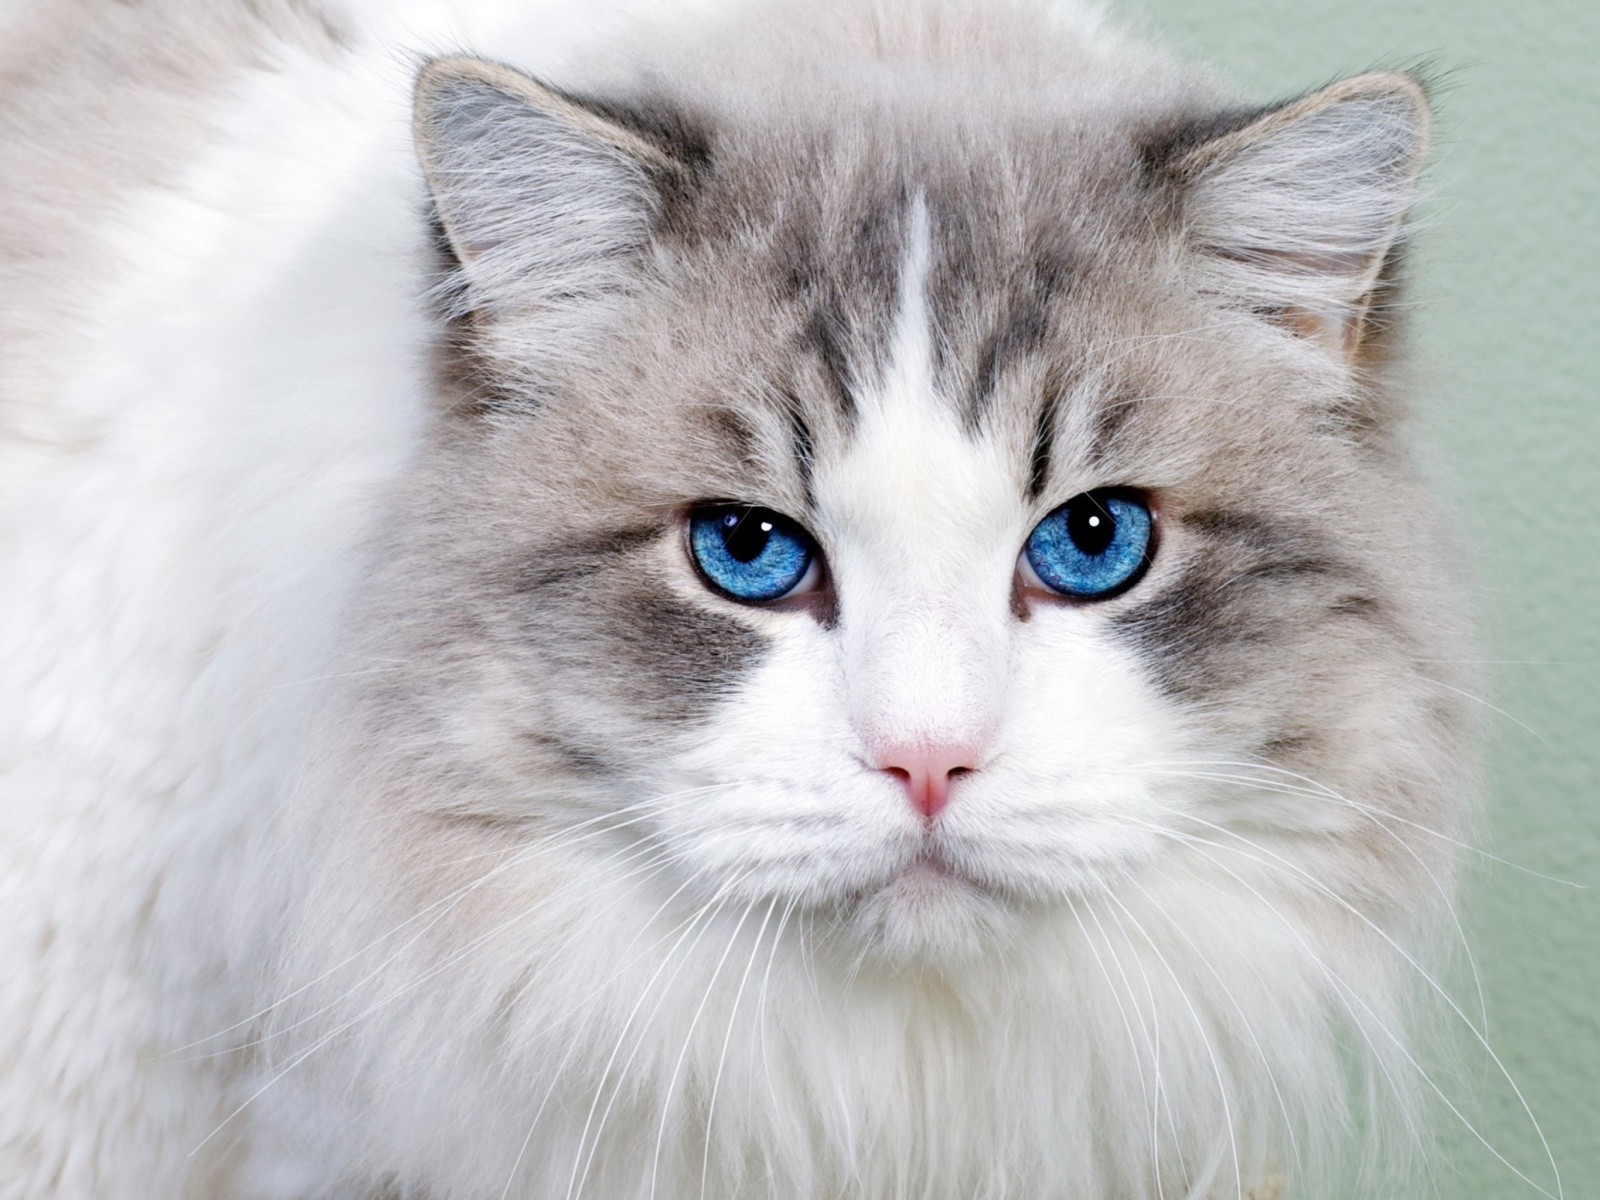 Cat with Blue Eyes wallpaper 1600x1200